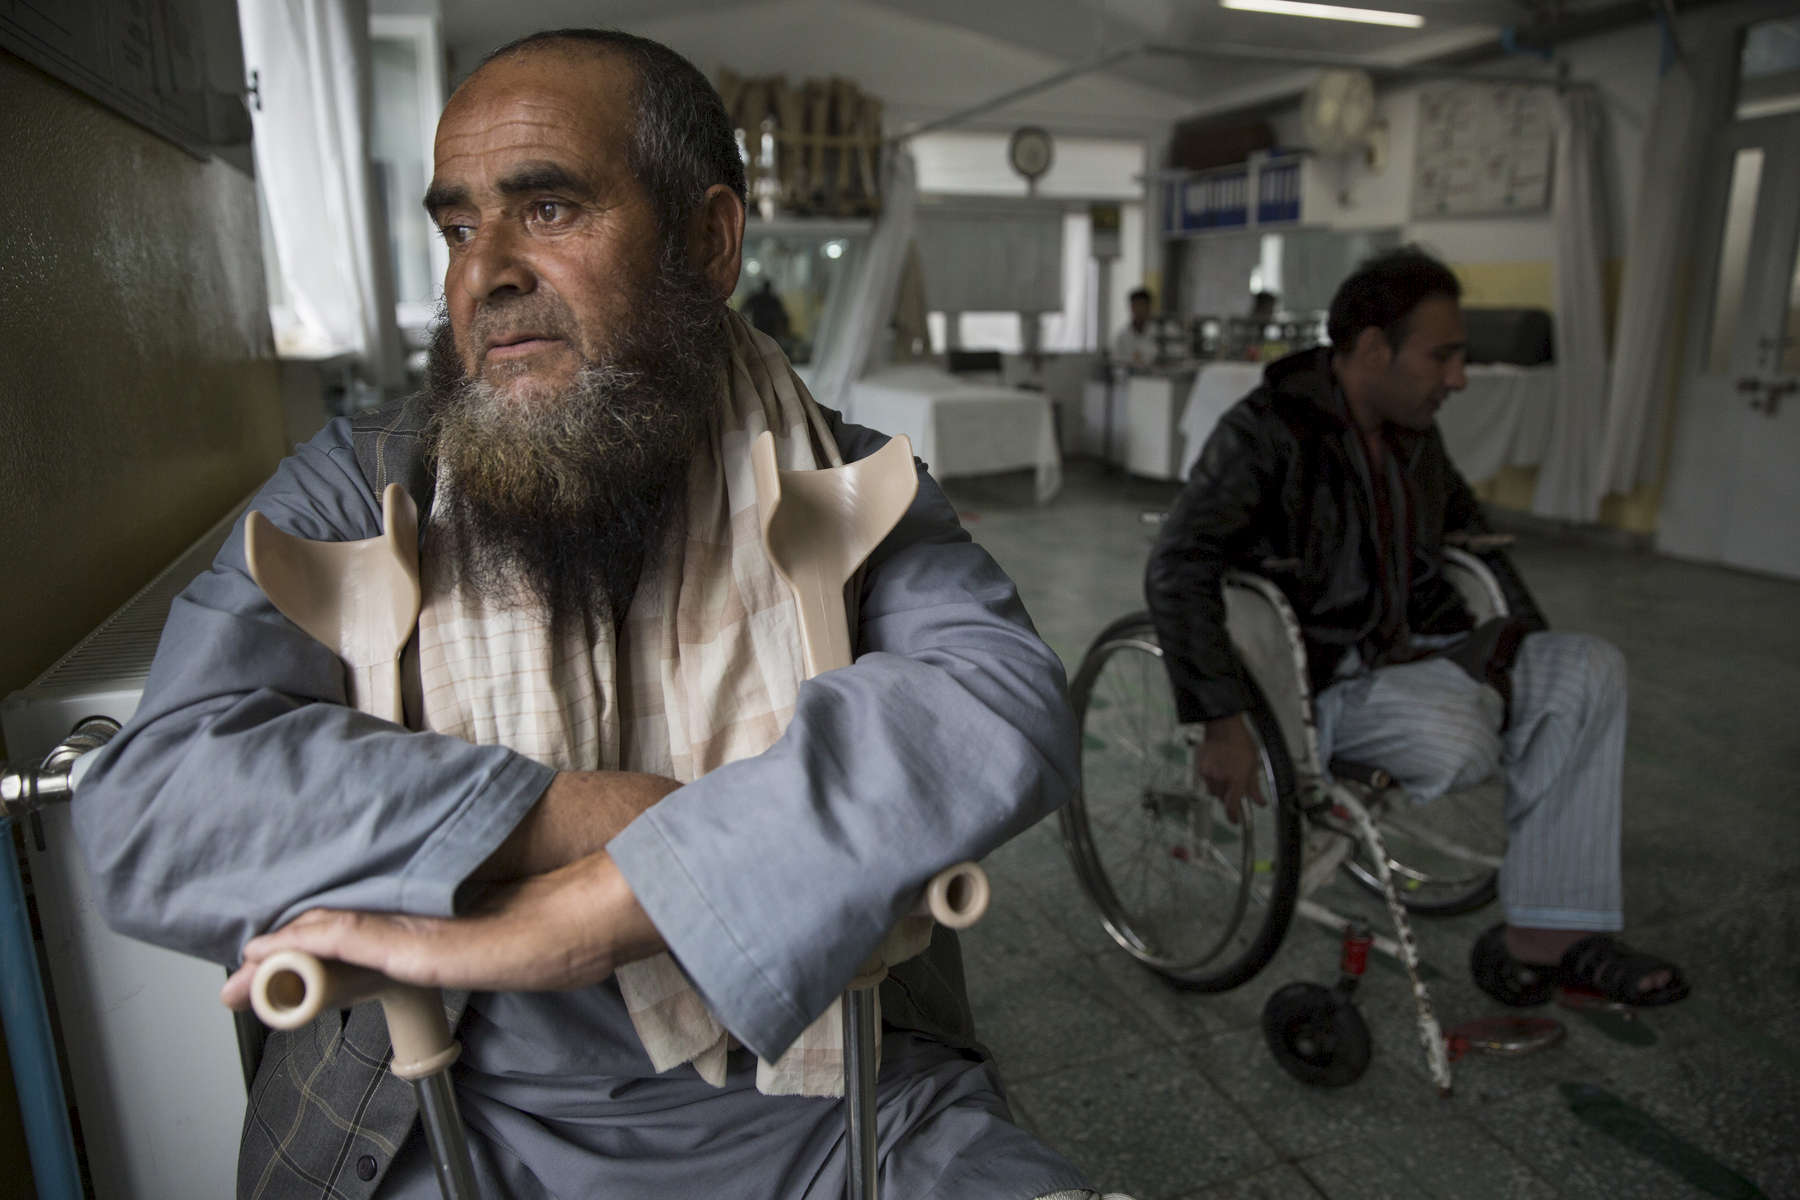 KABUL, AFGHANISTAN -APRIL 2, 2016: Abdul Ahad, a double amputee from a mine explosion in Ghazni rests after a day of walking on his new prosthetics. At the ICRC Orthopedic center disabled ANA military patients get their new prosthetic aligned by a  orthopedic therapist. Every year the UN comes out with their report documenting the unfortunate carnage from America’s longest and most costly war in history. Along with the price tag estimated in the hundreds of billions, the human toll from a 2015 UN Assistance Mission To Afghanistan (UNAMA) report stated the number of Afghan civilians killed and wounded surpassed 11,000.  which was the deadliest on record for civilians in Afghanistan since the US-led invasion more than 14 years ago. 